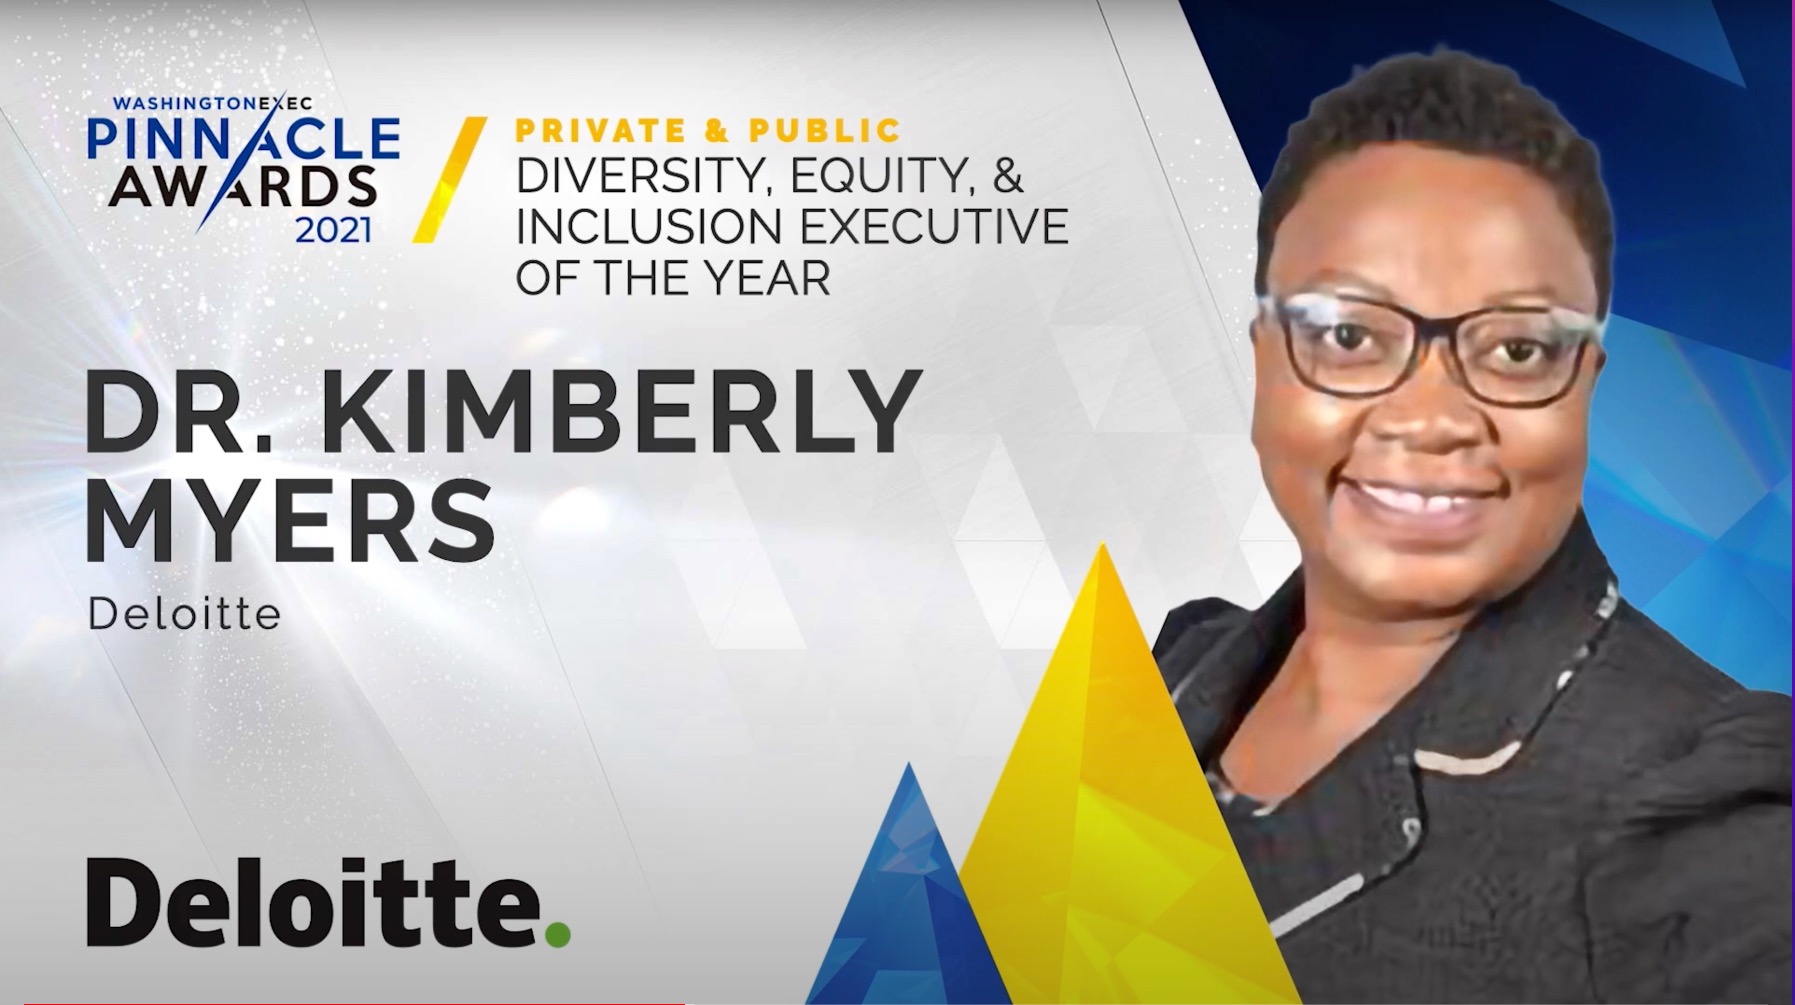 DEI - Congratulations to Dr. Kimberly Myers from Deloitte LLP on winning the award for Diversity, Equity, & Inclusion Executive of the Year in the Private & Public Sectors